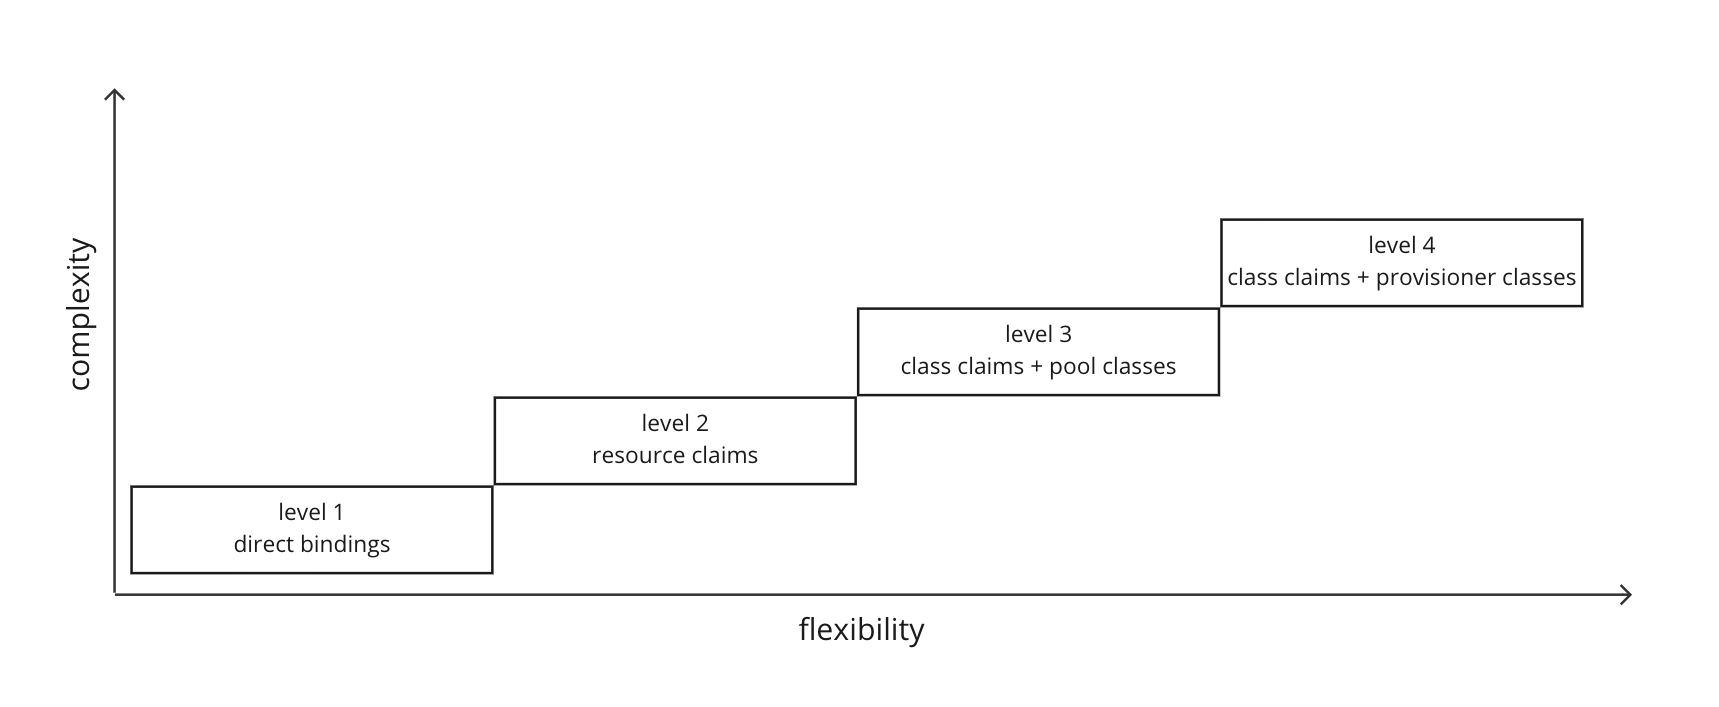 Diagram shows a summary of the levels of service consumption in Tanzu Application Platform.